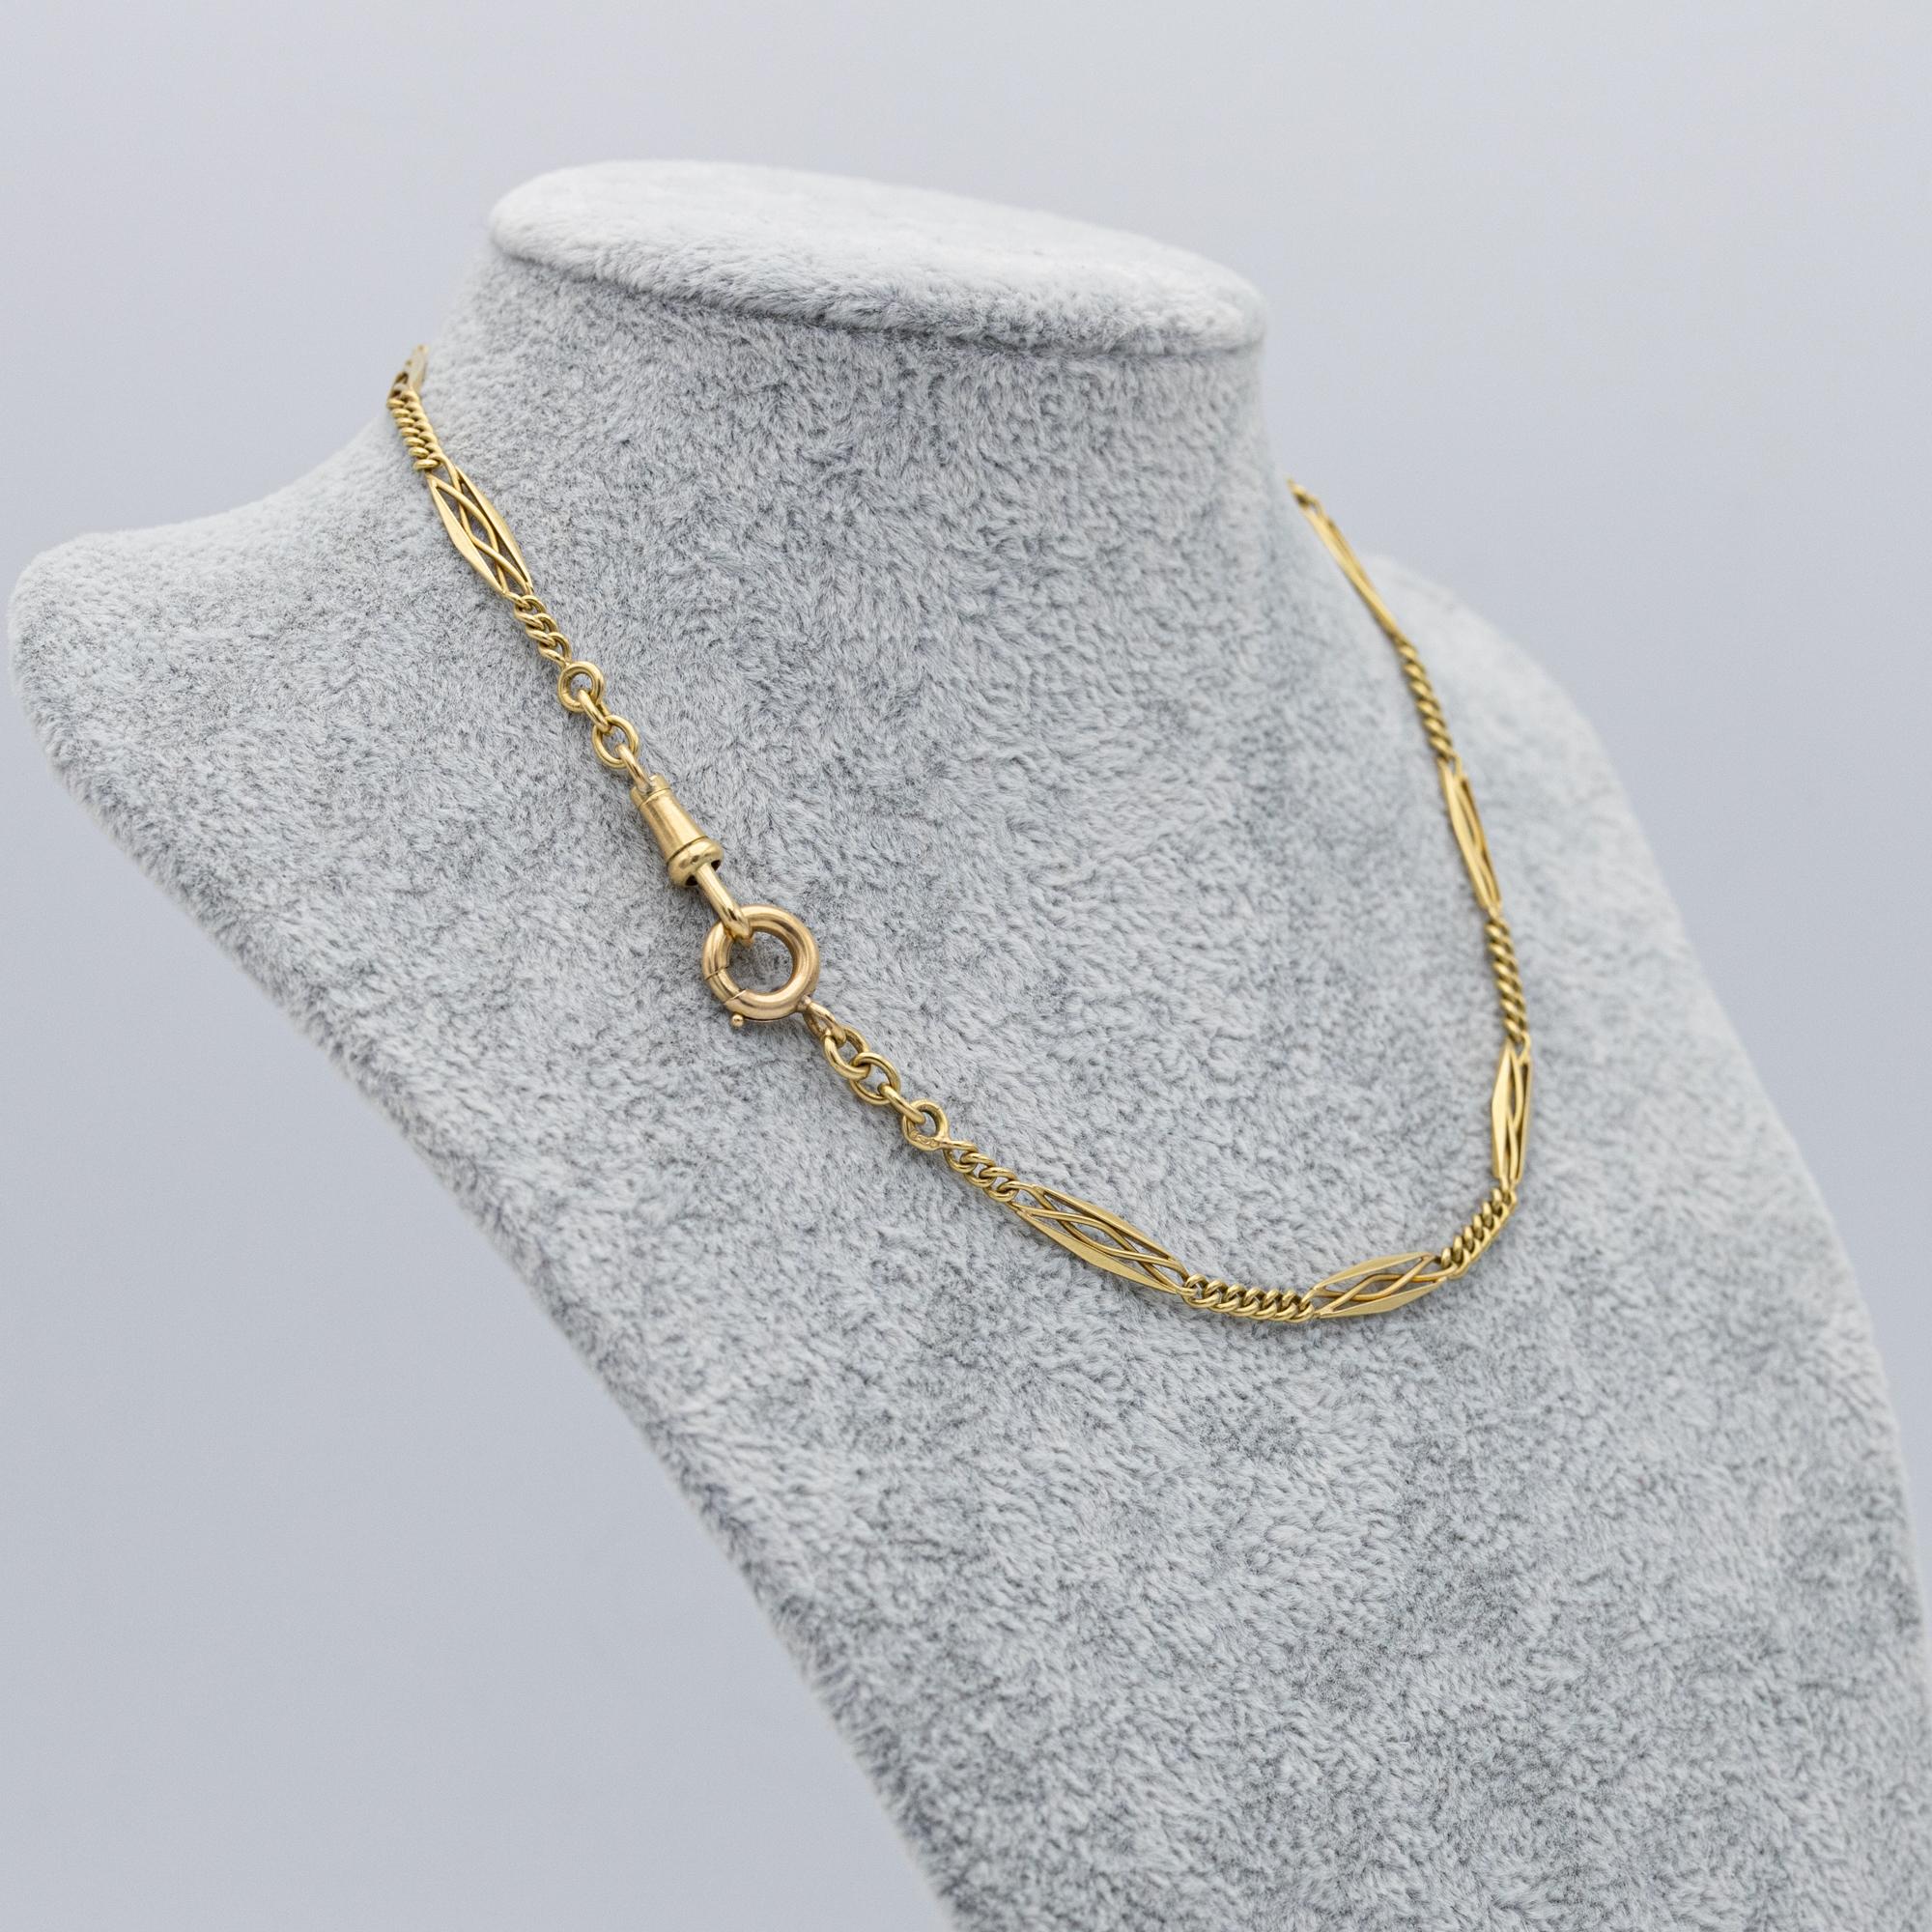 For sale is this wonderful 18 K yellow gold Albert necklace. It consists of spacial, fancy looking Lozenge links, short curb chains, an antique dog clip and a lovely bolt ring. It is fully hallmarked with all the needed French marks : eagle heads, a